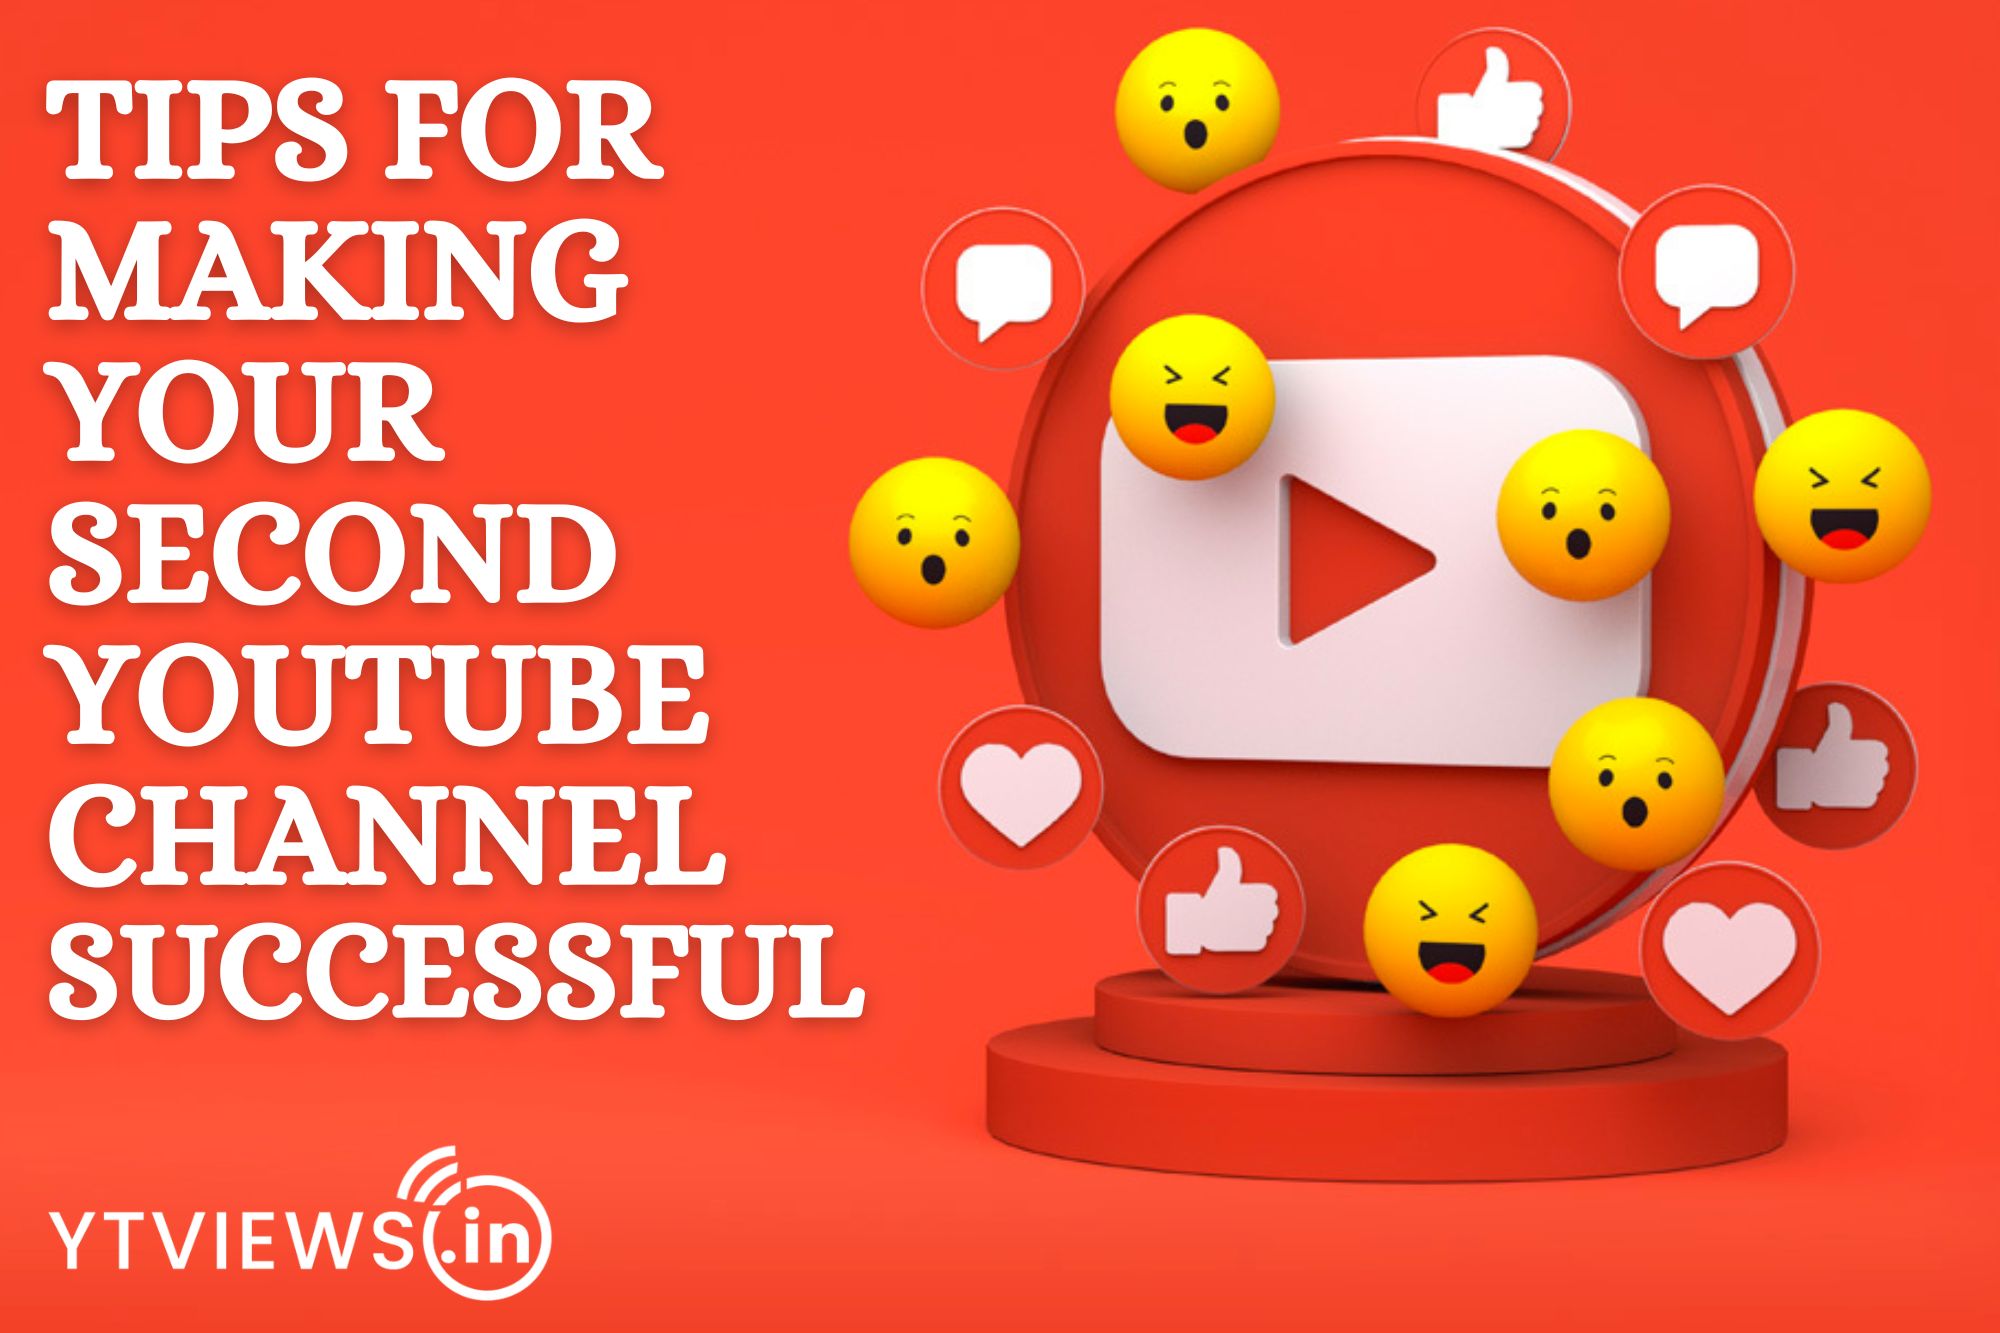 Tips For Making Your Second Youtube Channel Successful